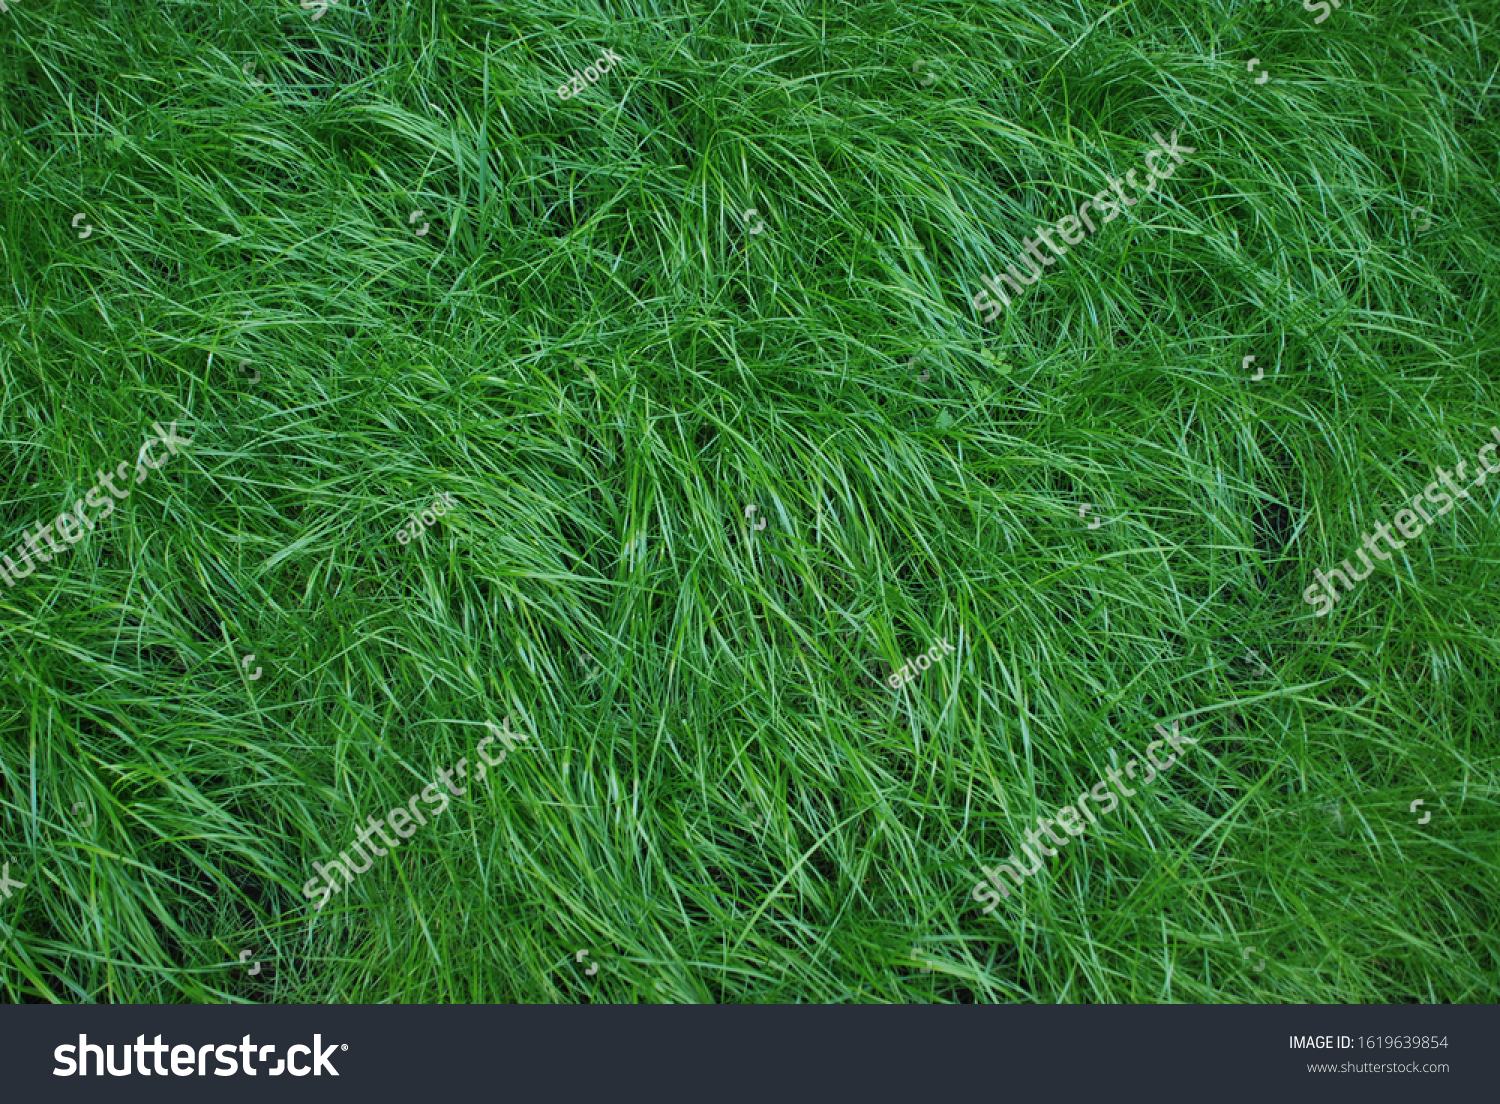 Nice and soft grass texture, looks like a feather softness. #1619639854